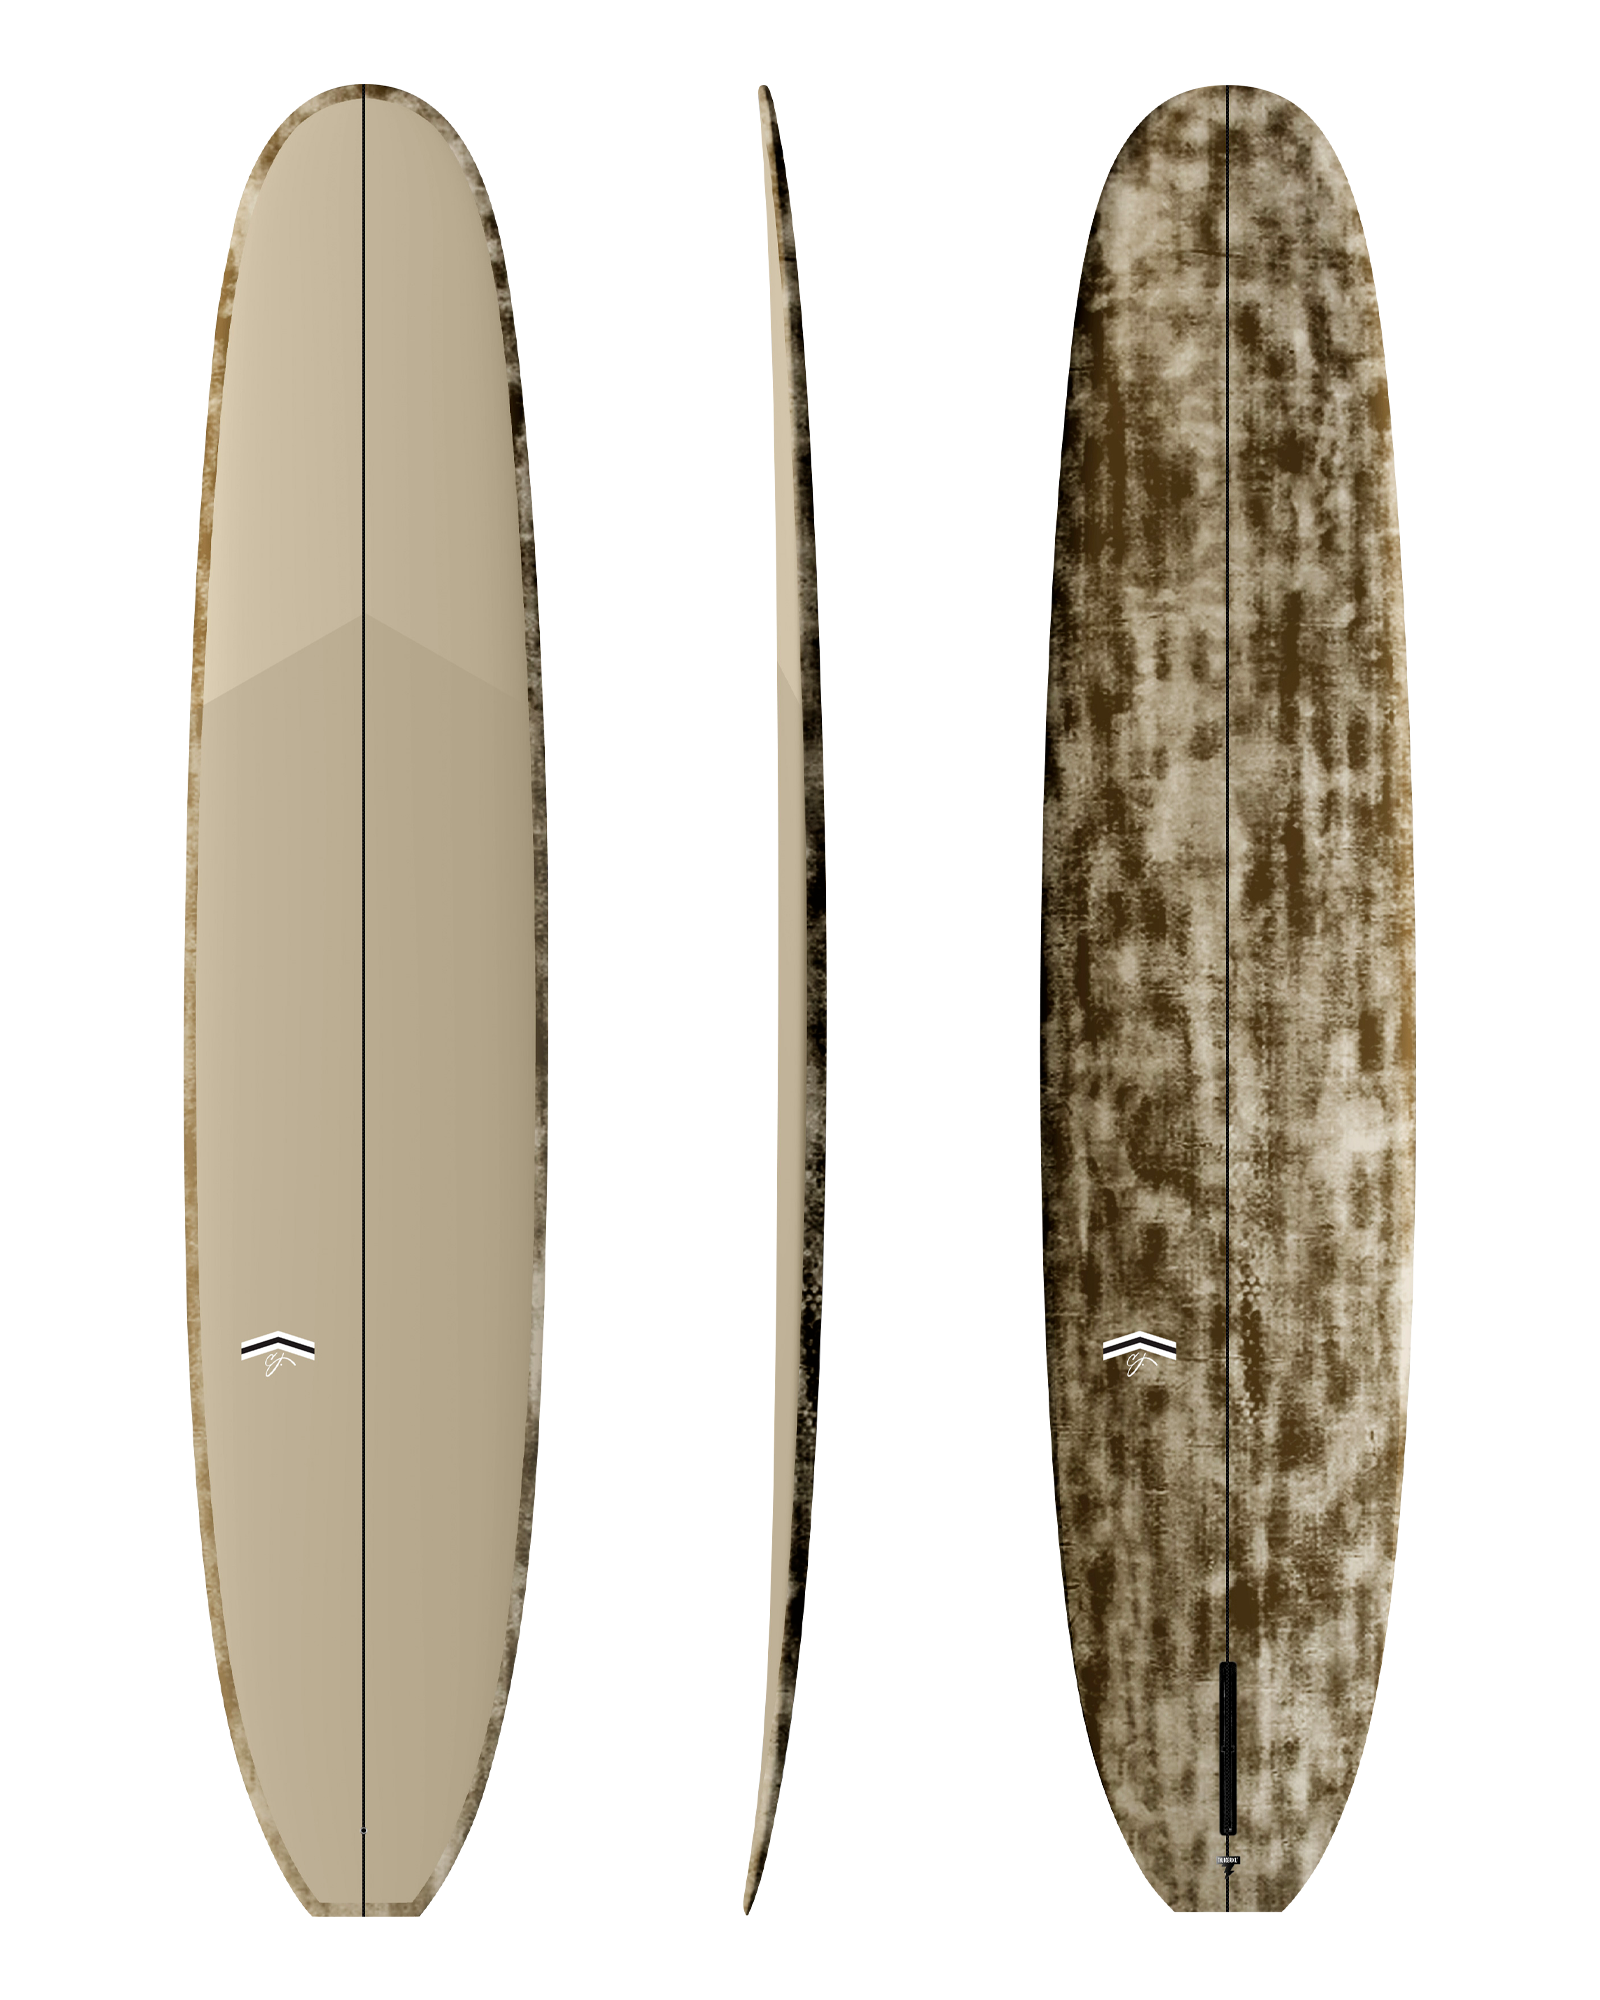 CJ Nelson Slasher Low Pro in Tan Brushed Carbon